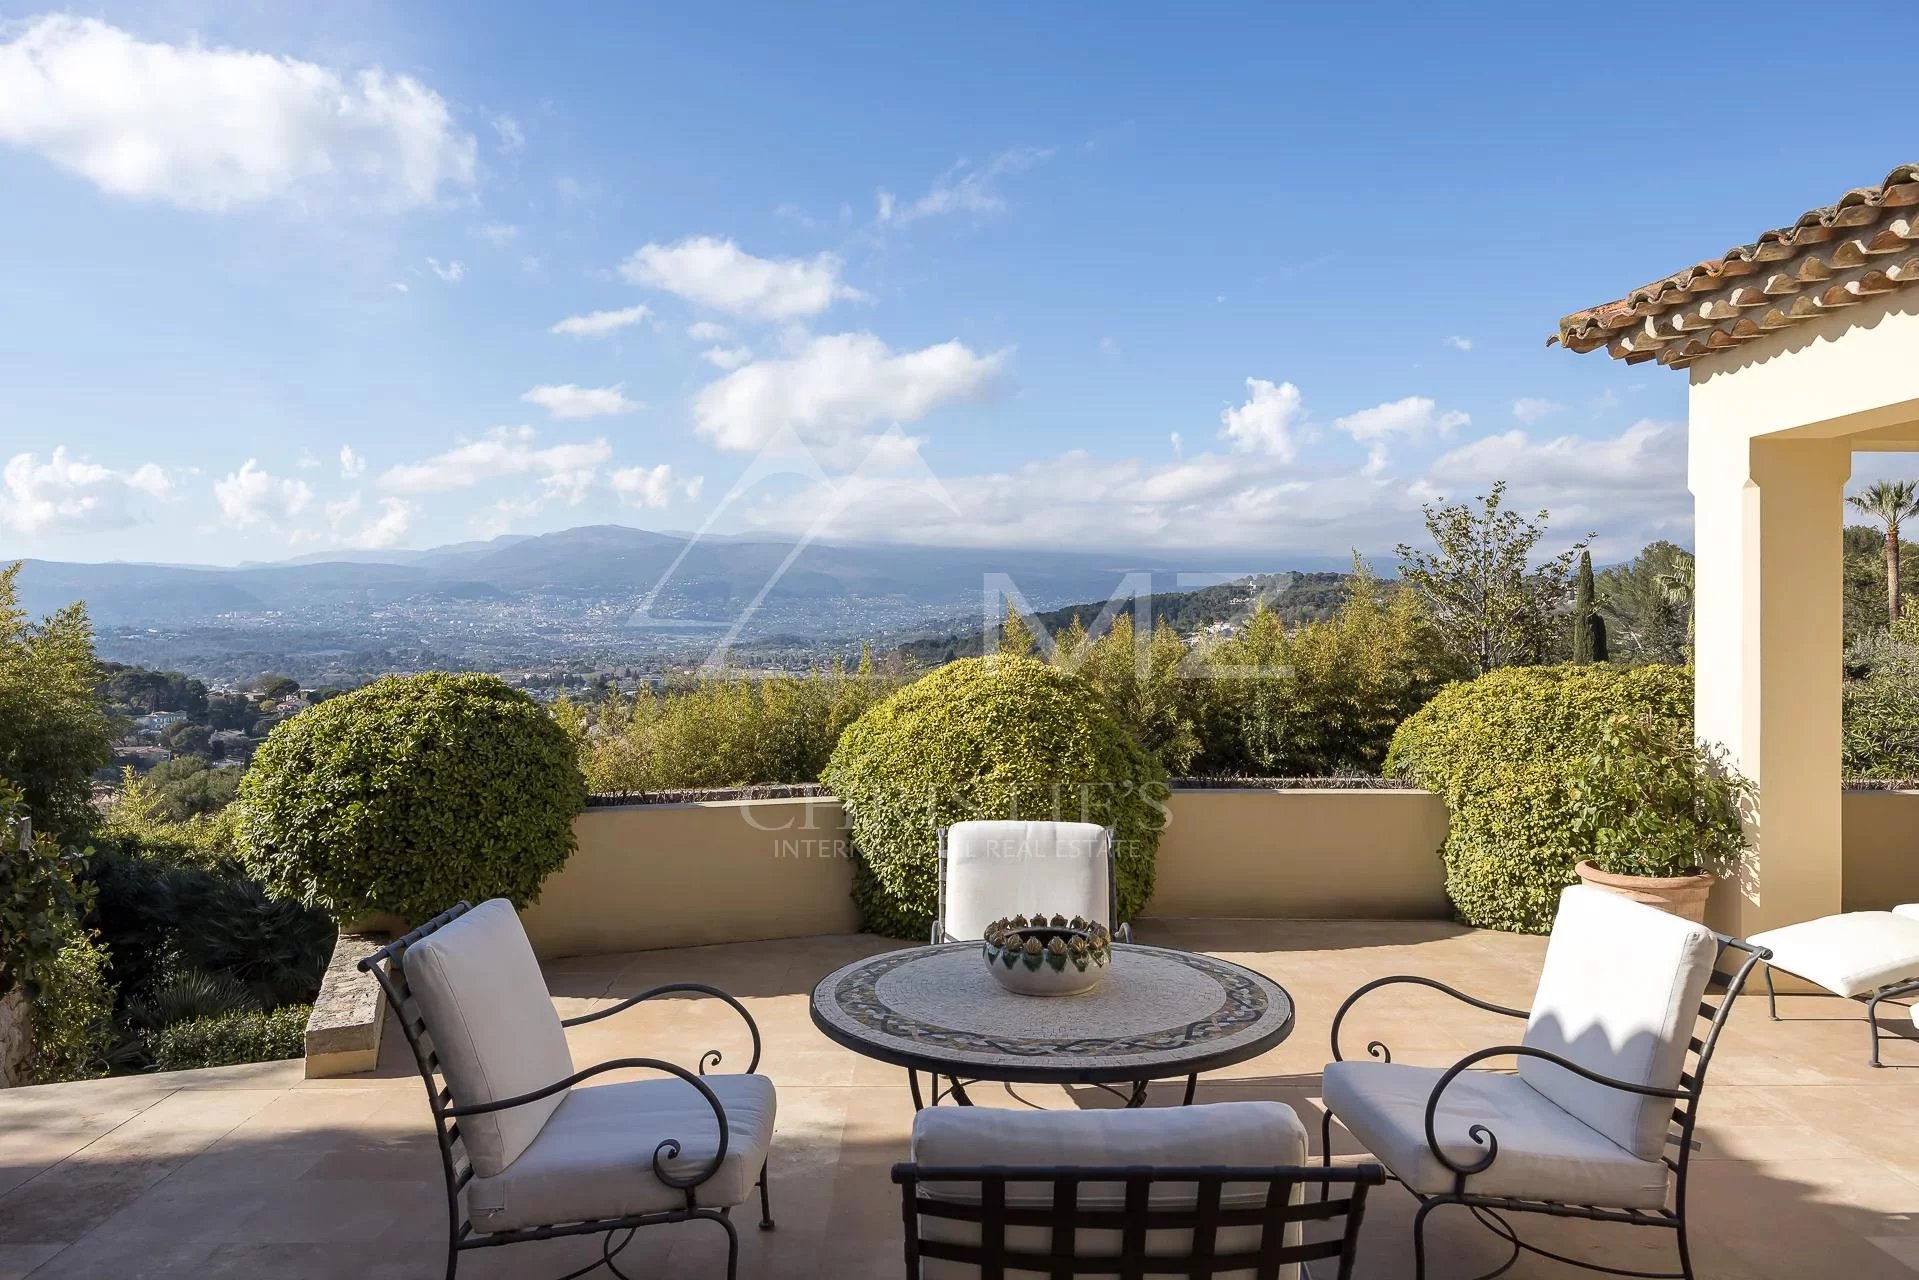 Walking distance to the village of Mougins and amenities